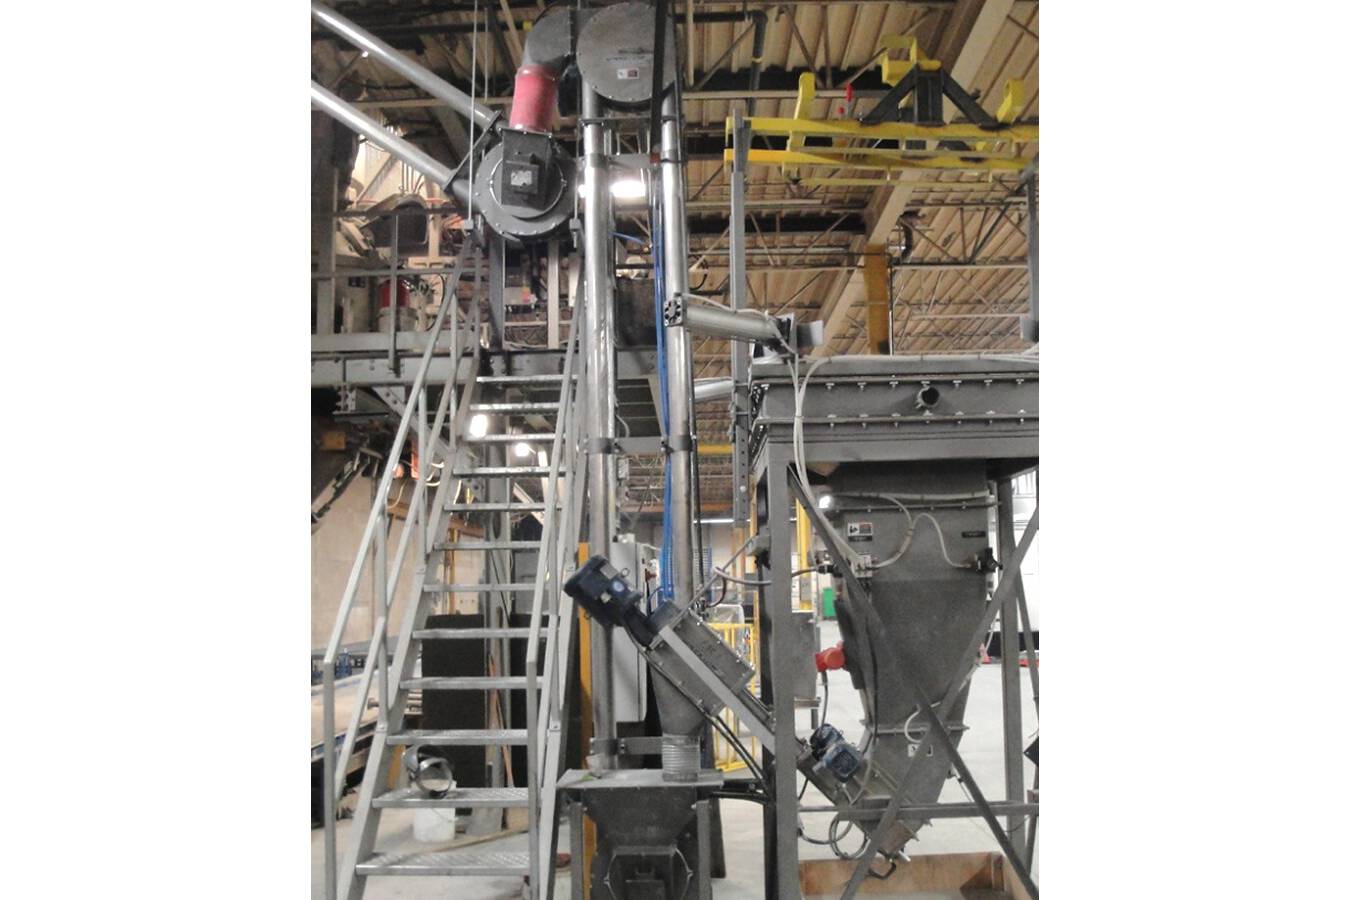 A vertical Aero Mechanical Conveyor moves cement powder from dual Flexible Screw Conveyors to a second Aero Mechanical Conveyor that extends through the building roof to an outdoor storage silo.